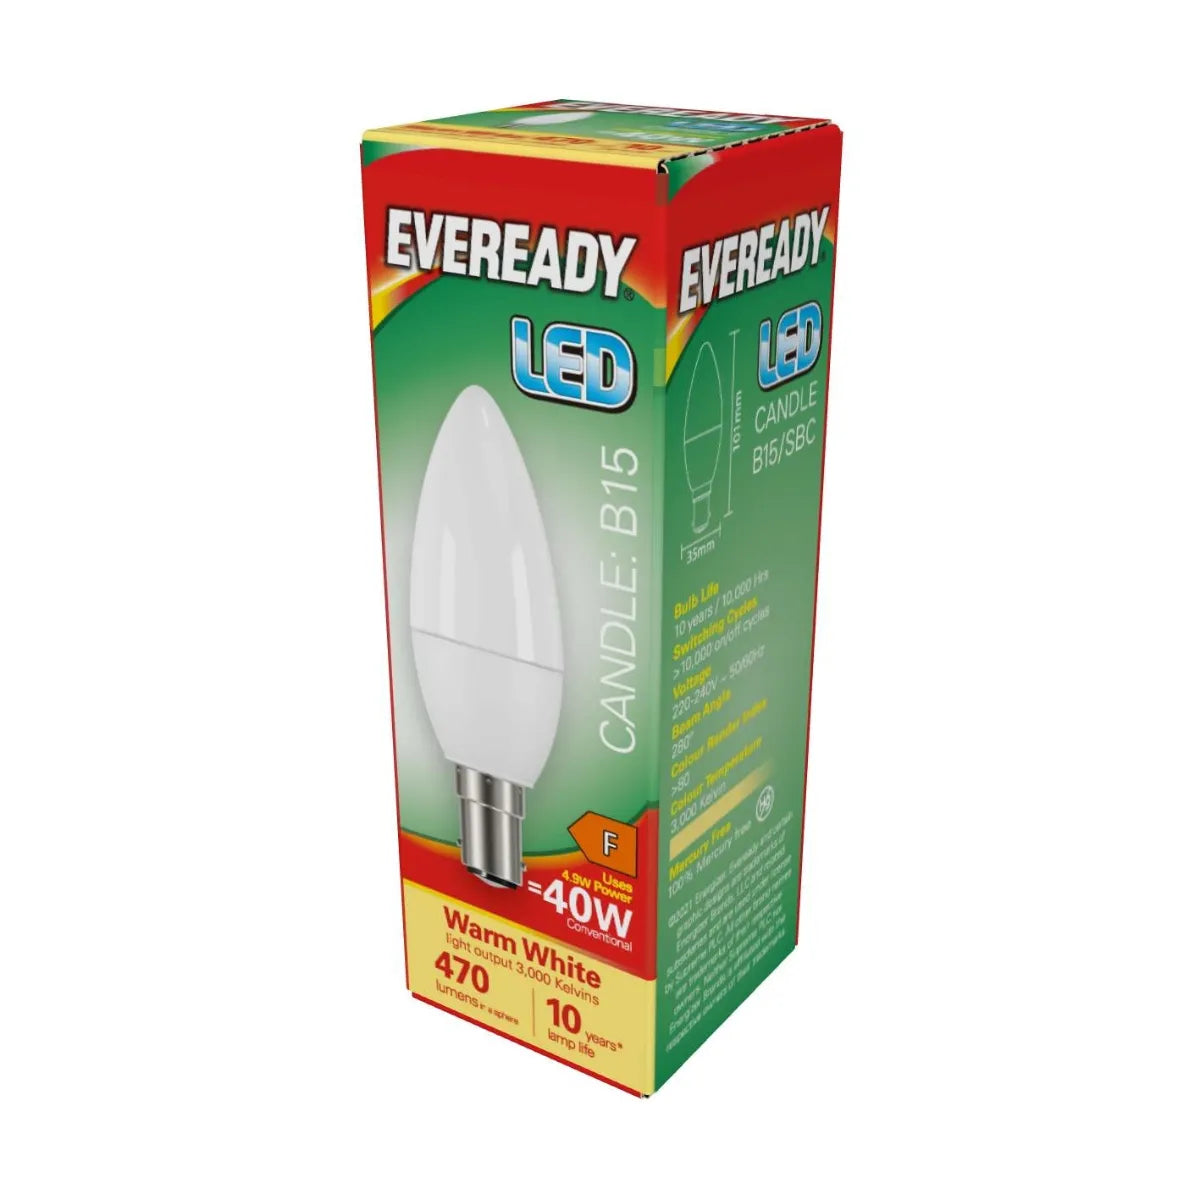 Eveready LED Candle B15 (SBC) 470lm 4.9W 3,000K, Warm White (40W Replacement)